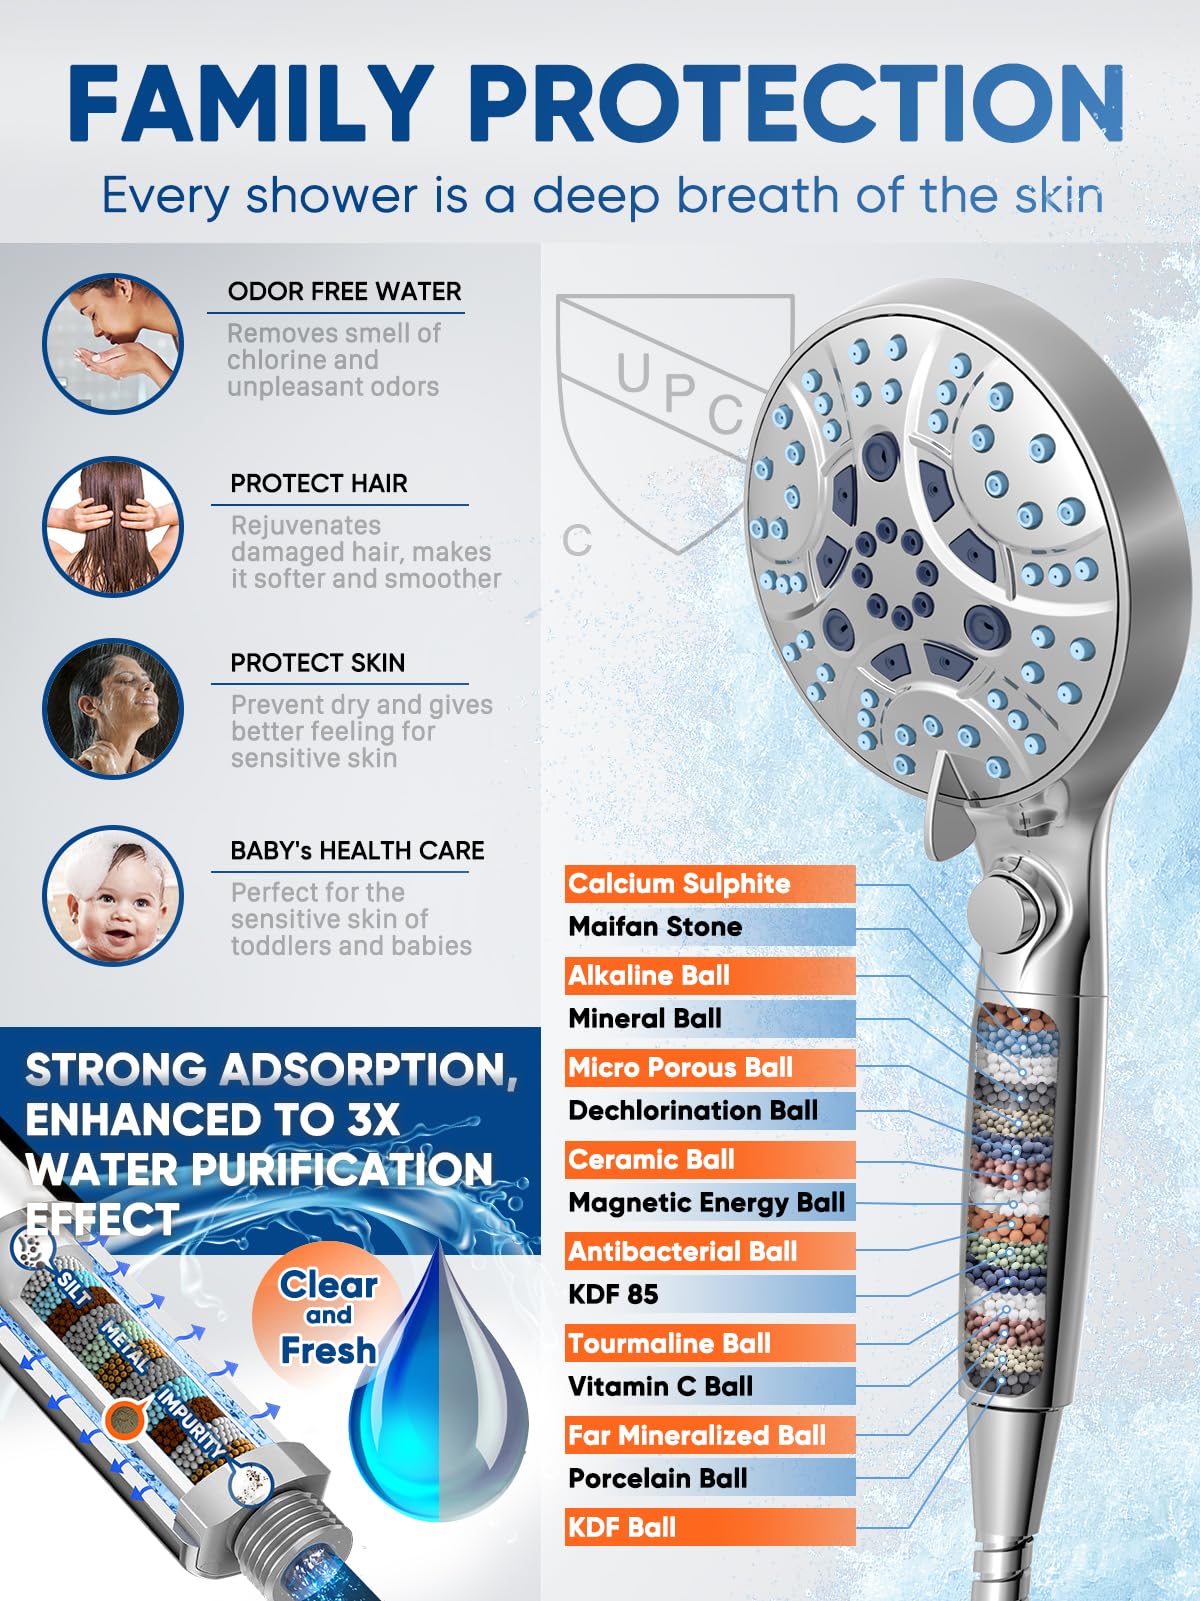 Pavezo High Pressure Handheld Shower Head with Filter, ON/OFF Switch Pause Button, 10-mode Shower Head with Hard Water Softener Filters, SS Hose, Anti-clog & Powerful Clean Tile & Pets, Premium Chrome